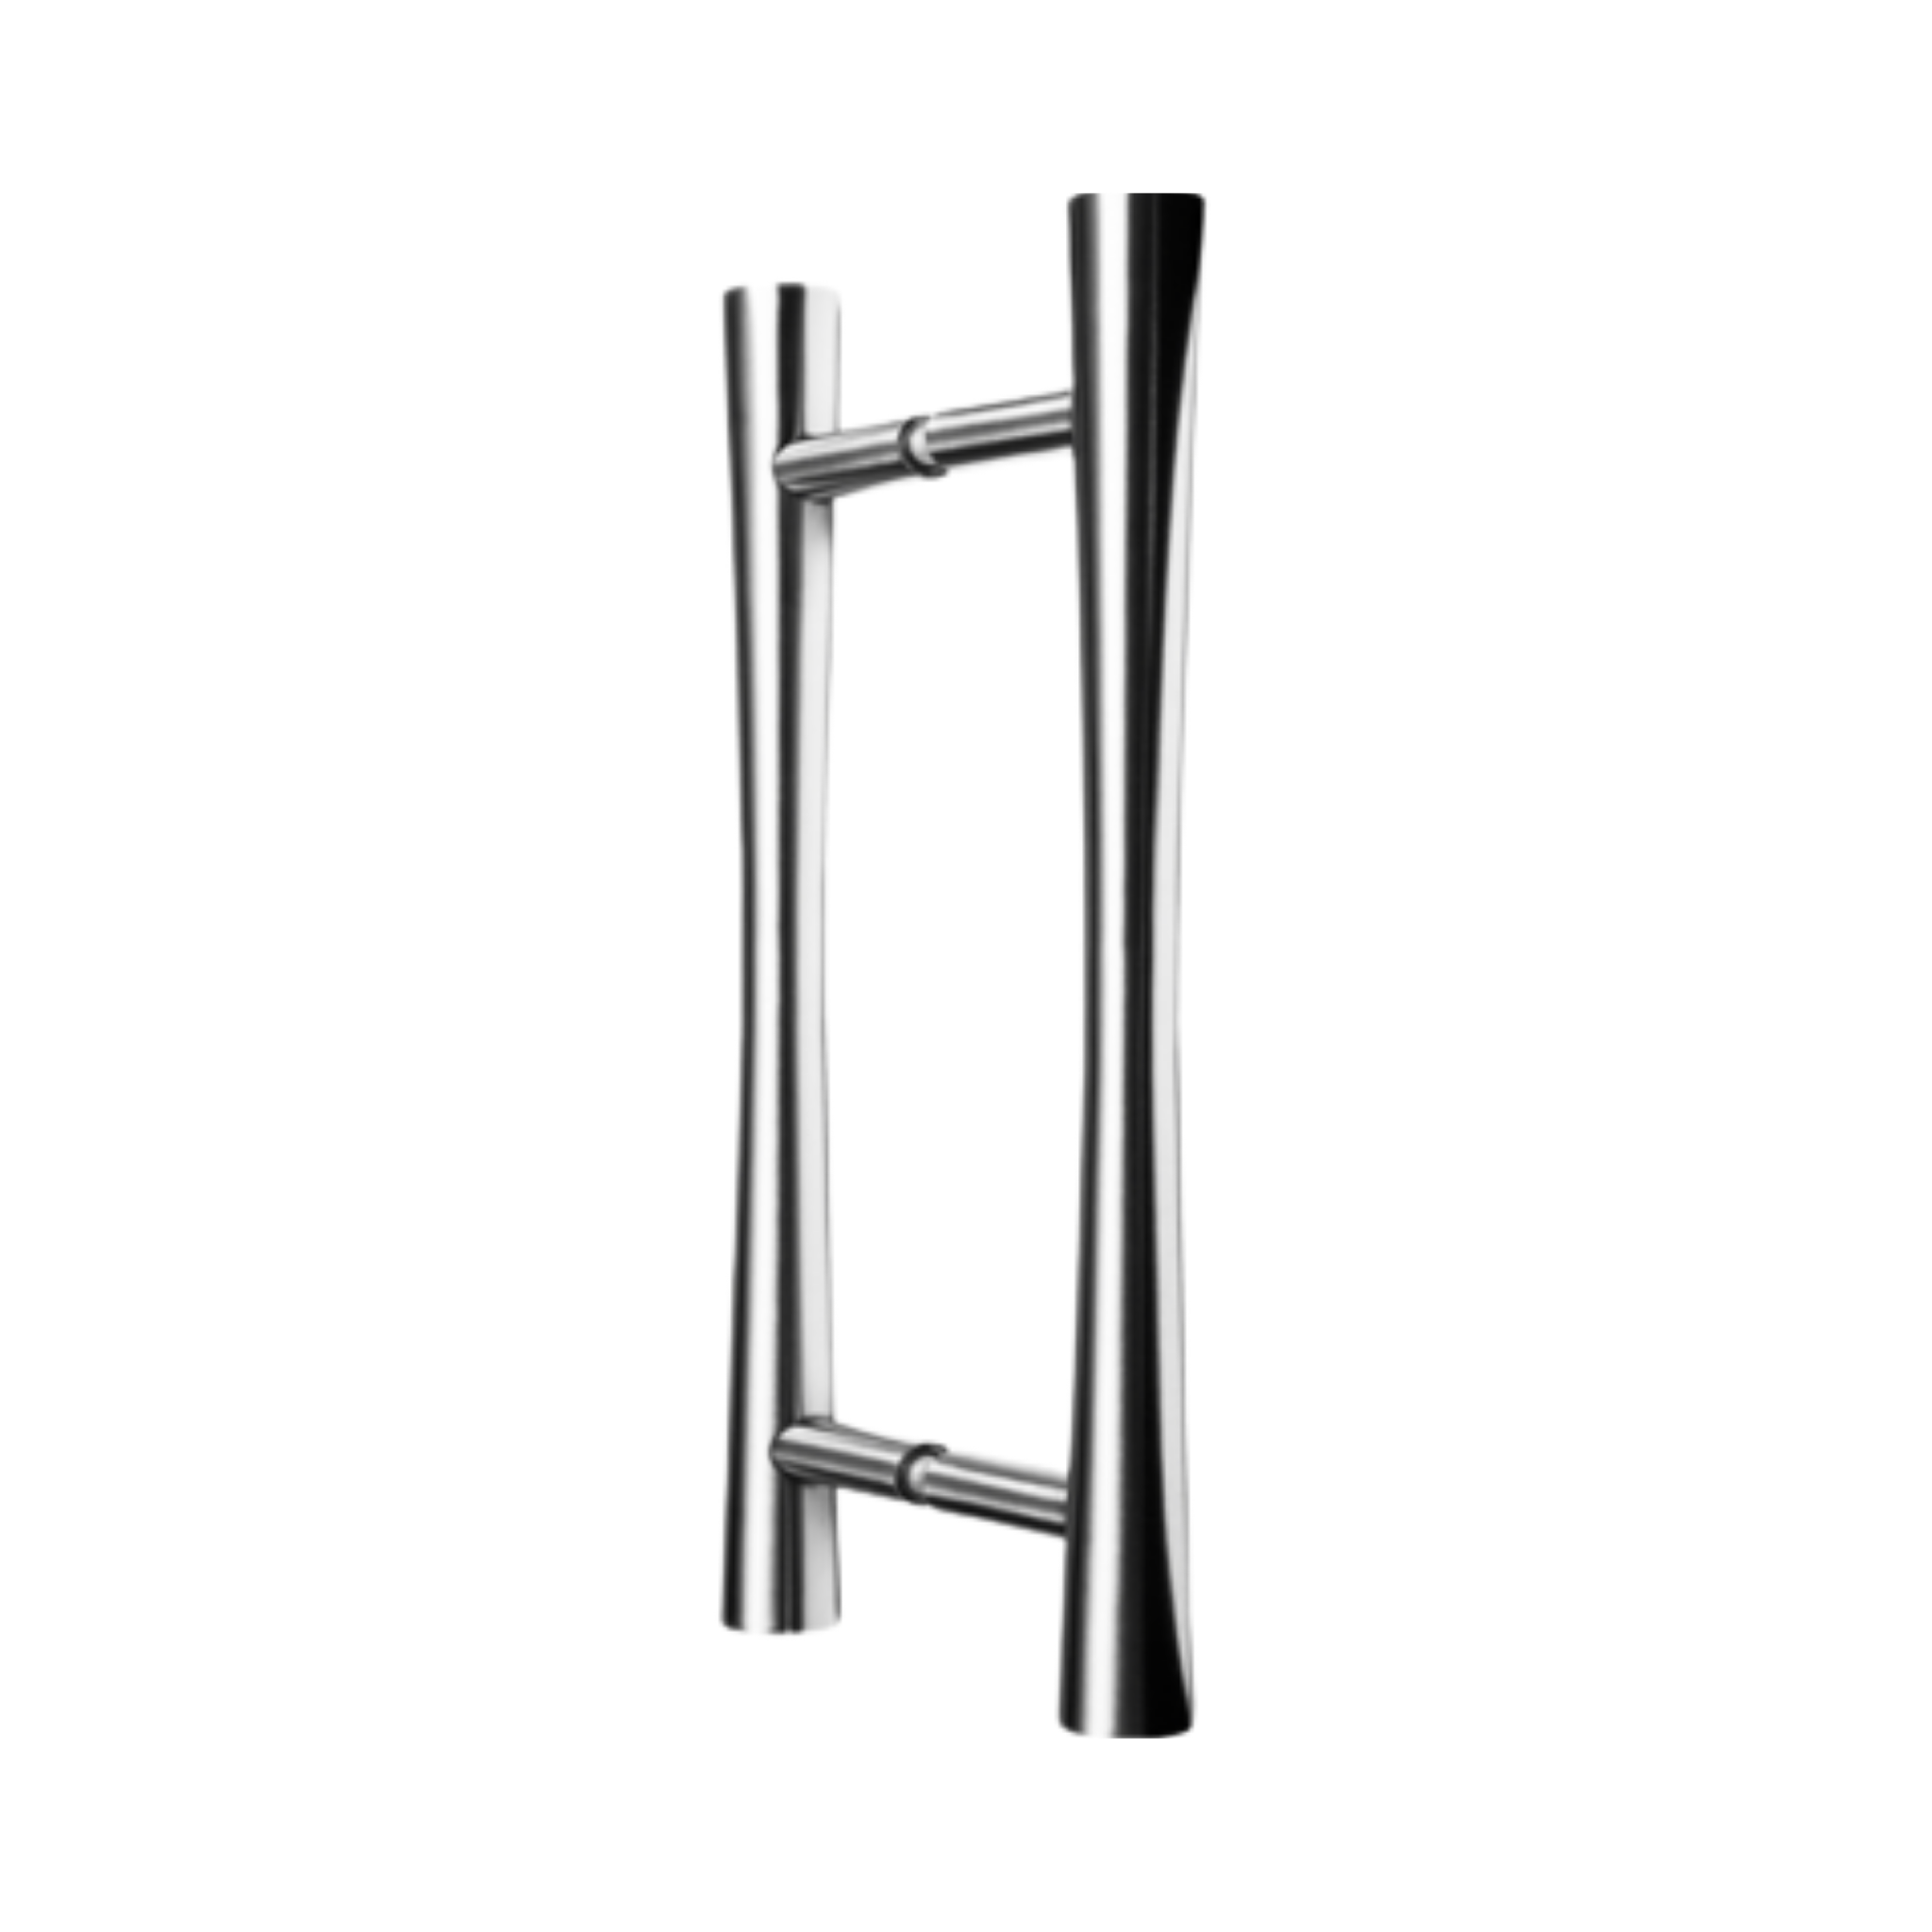 QS2514 Tapered RND T, Pull Handle, Round, T Handle, BTB, 410mm (l) x 300mm (ctc), Stainless Steel, QS